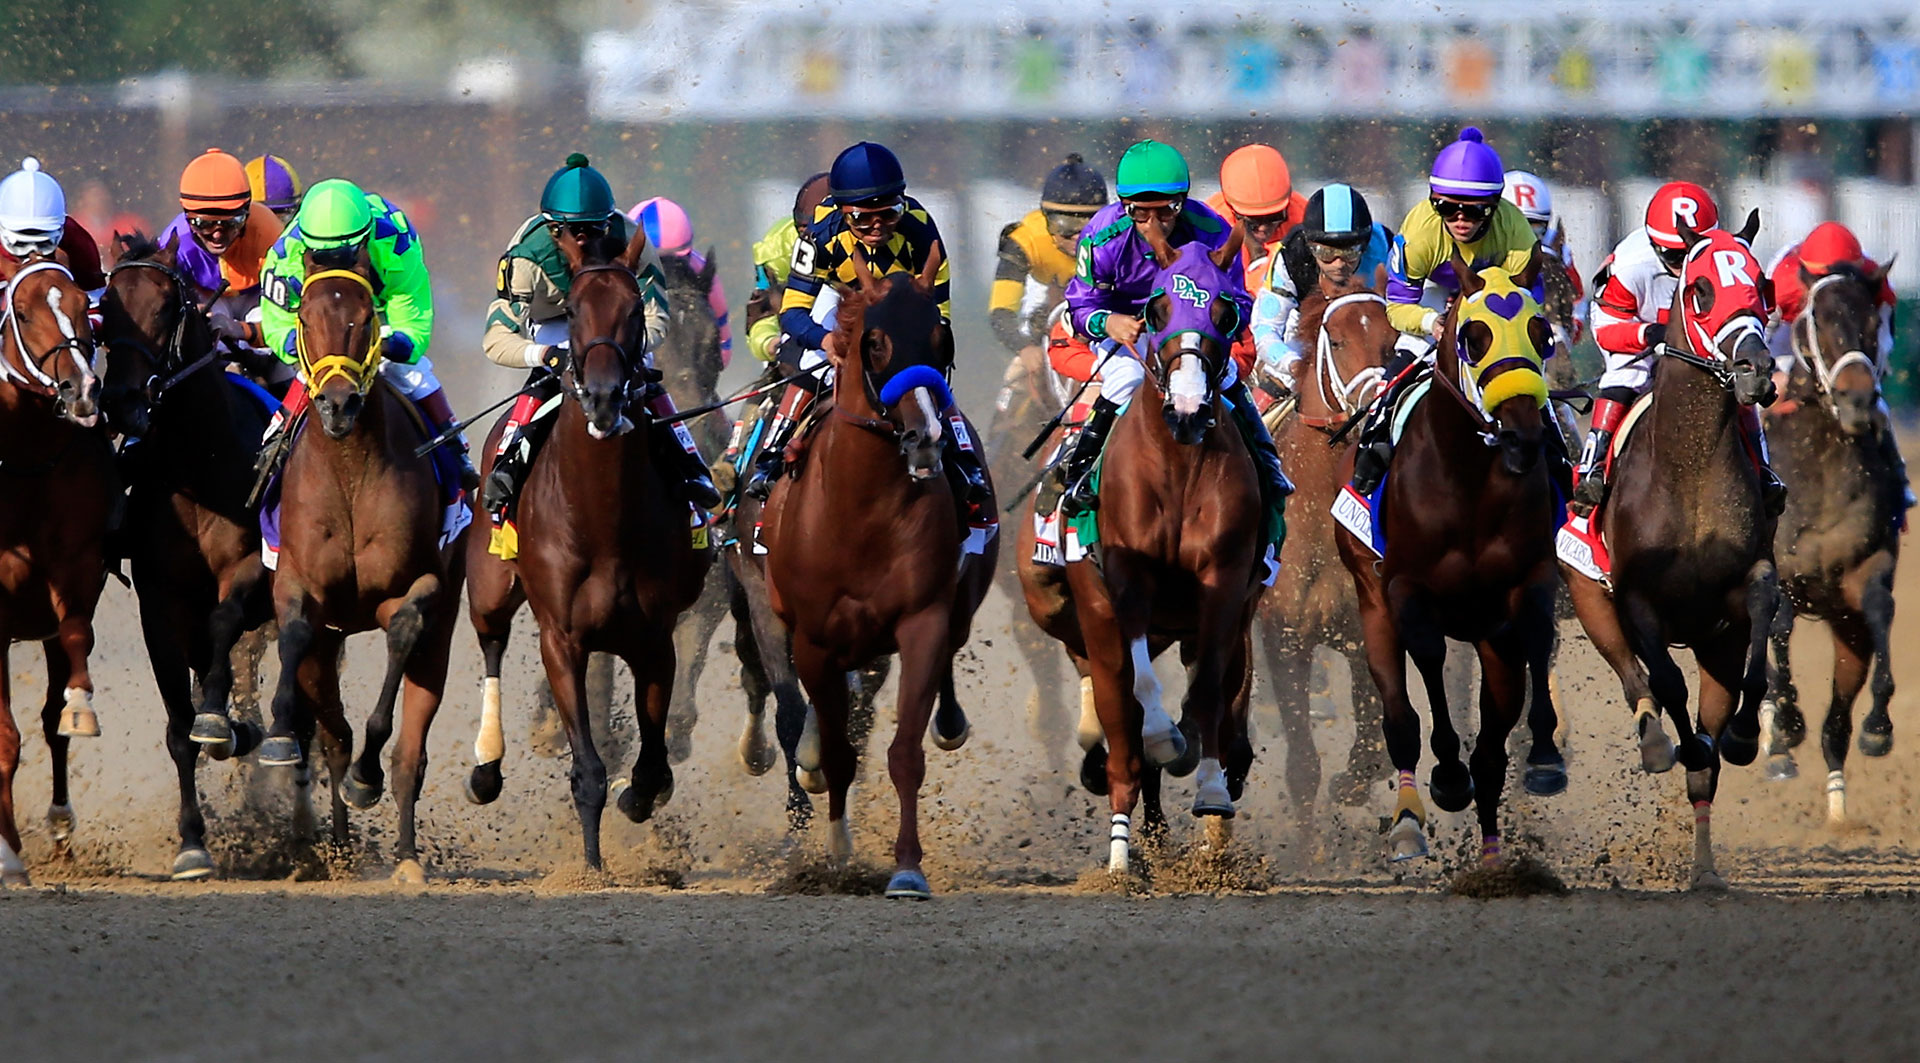 2018 Kentucky Derby Travel Packages Packages to the Kentucky Derby